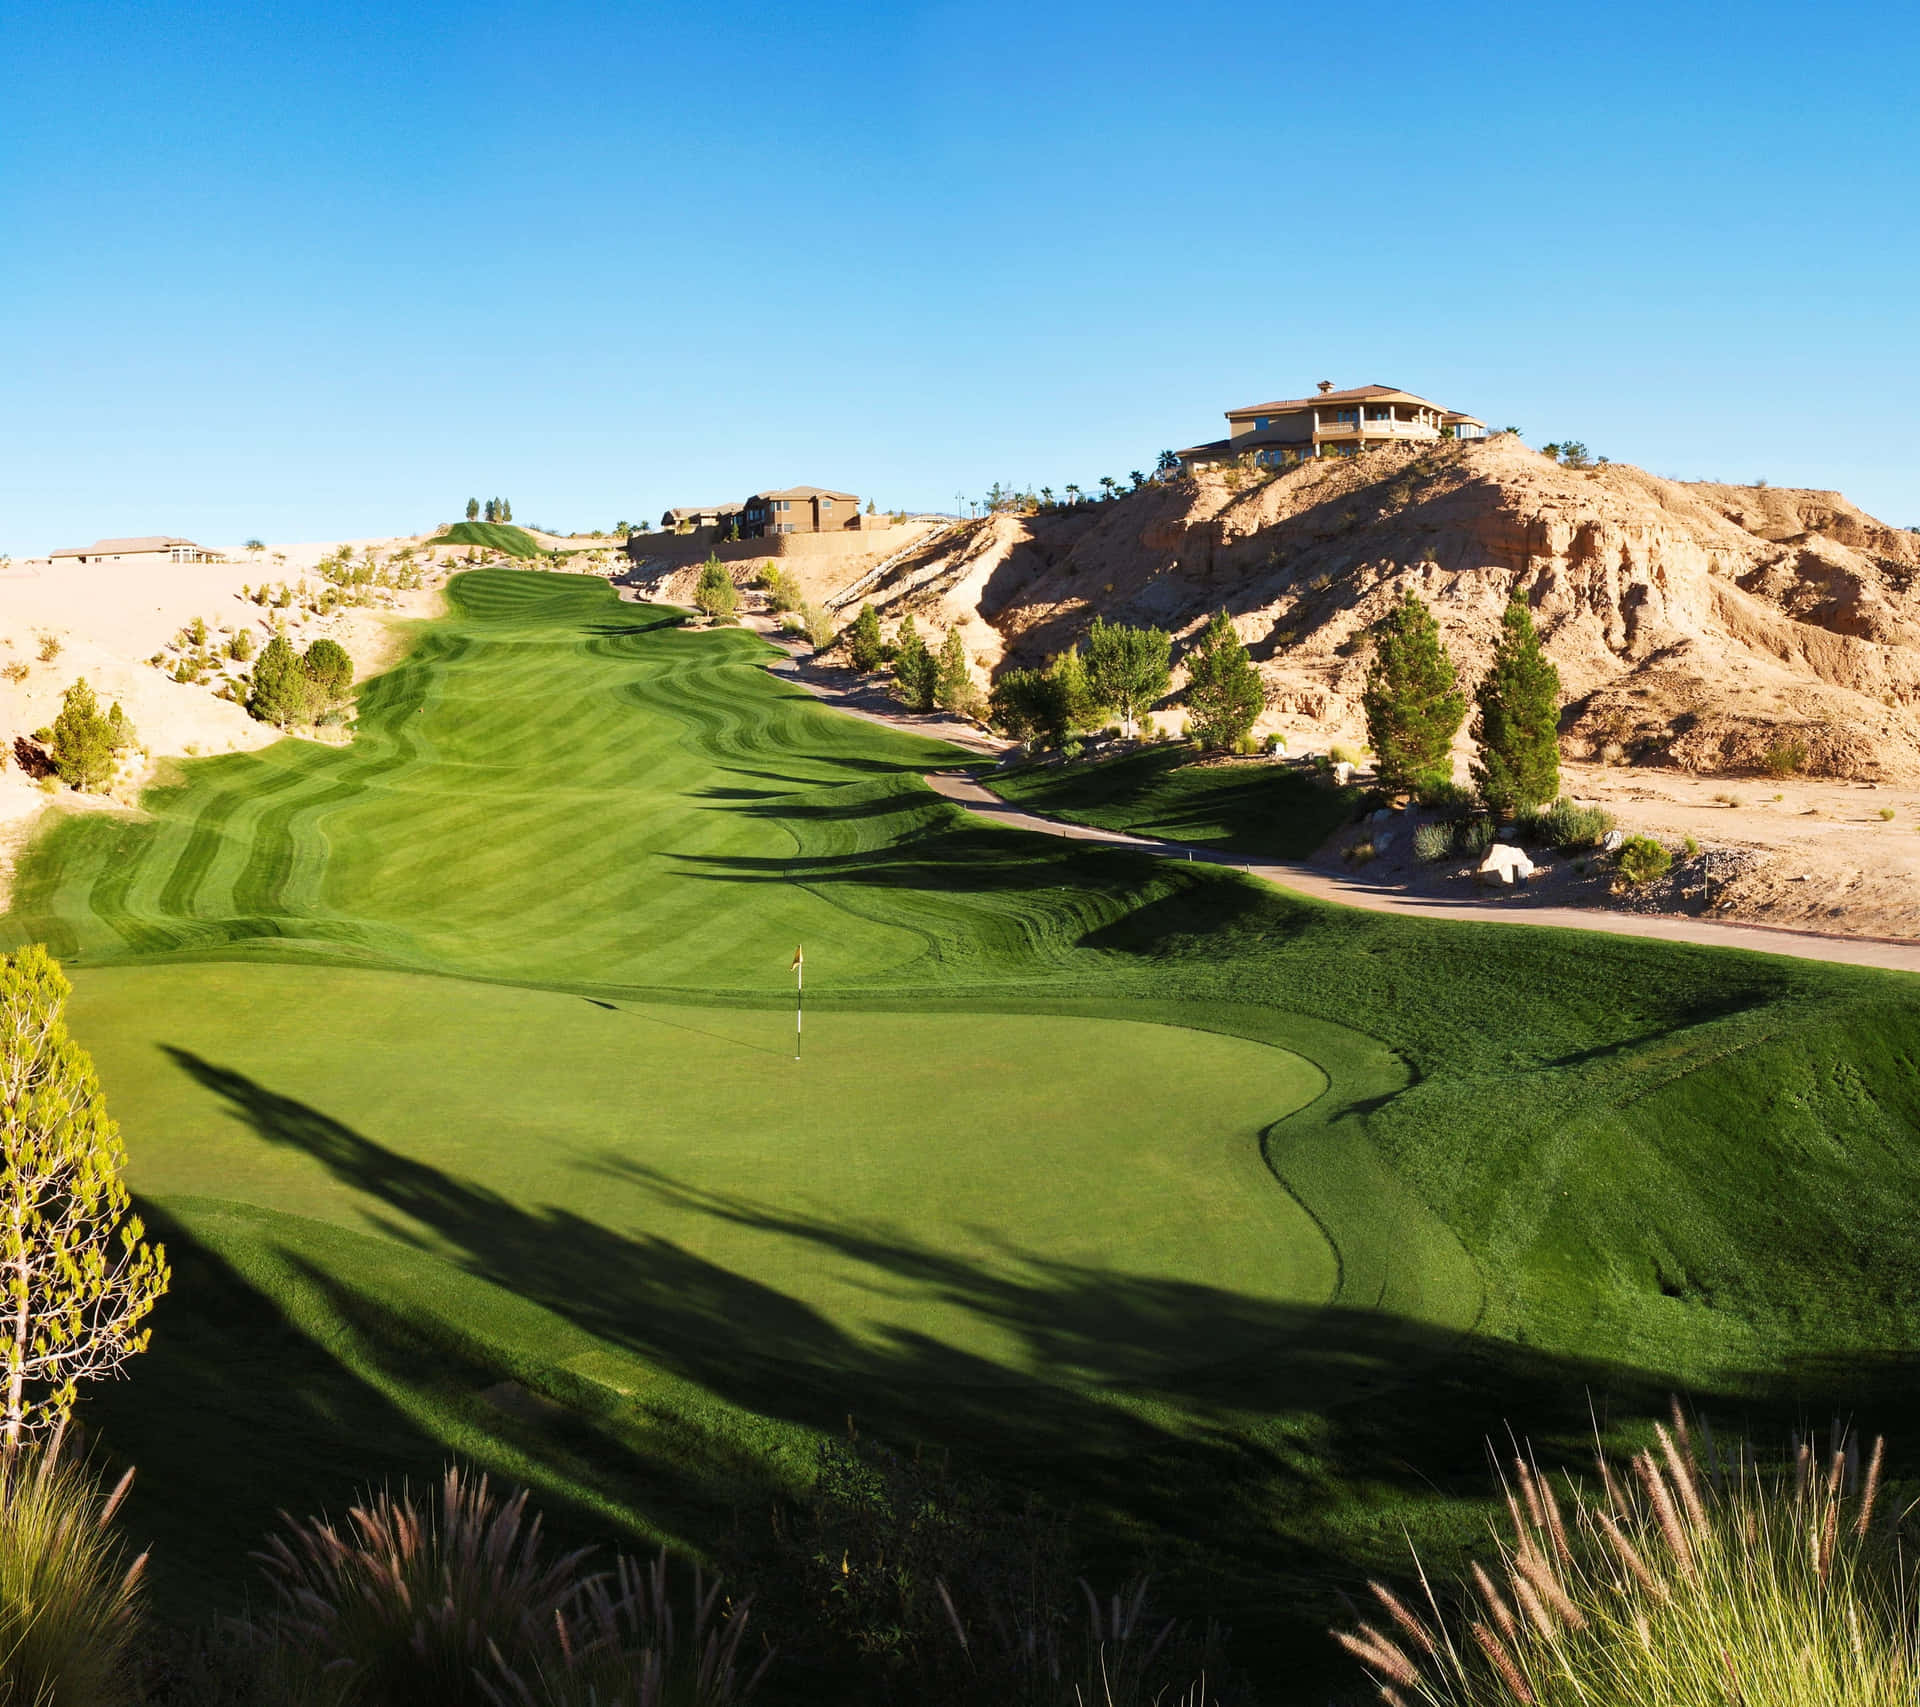 Enjoy the perfect day on the fairway of a scenic golf course